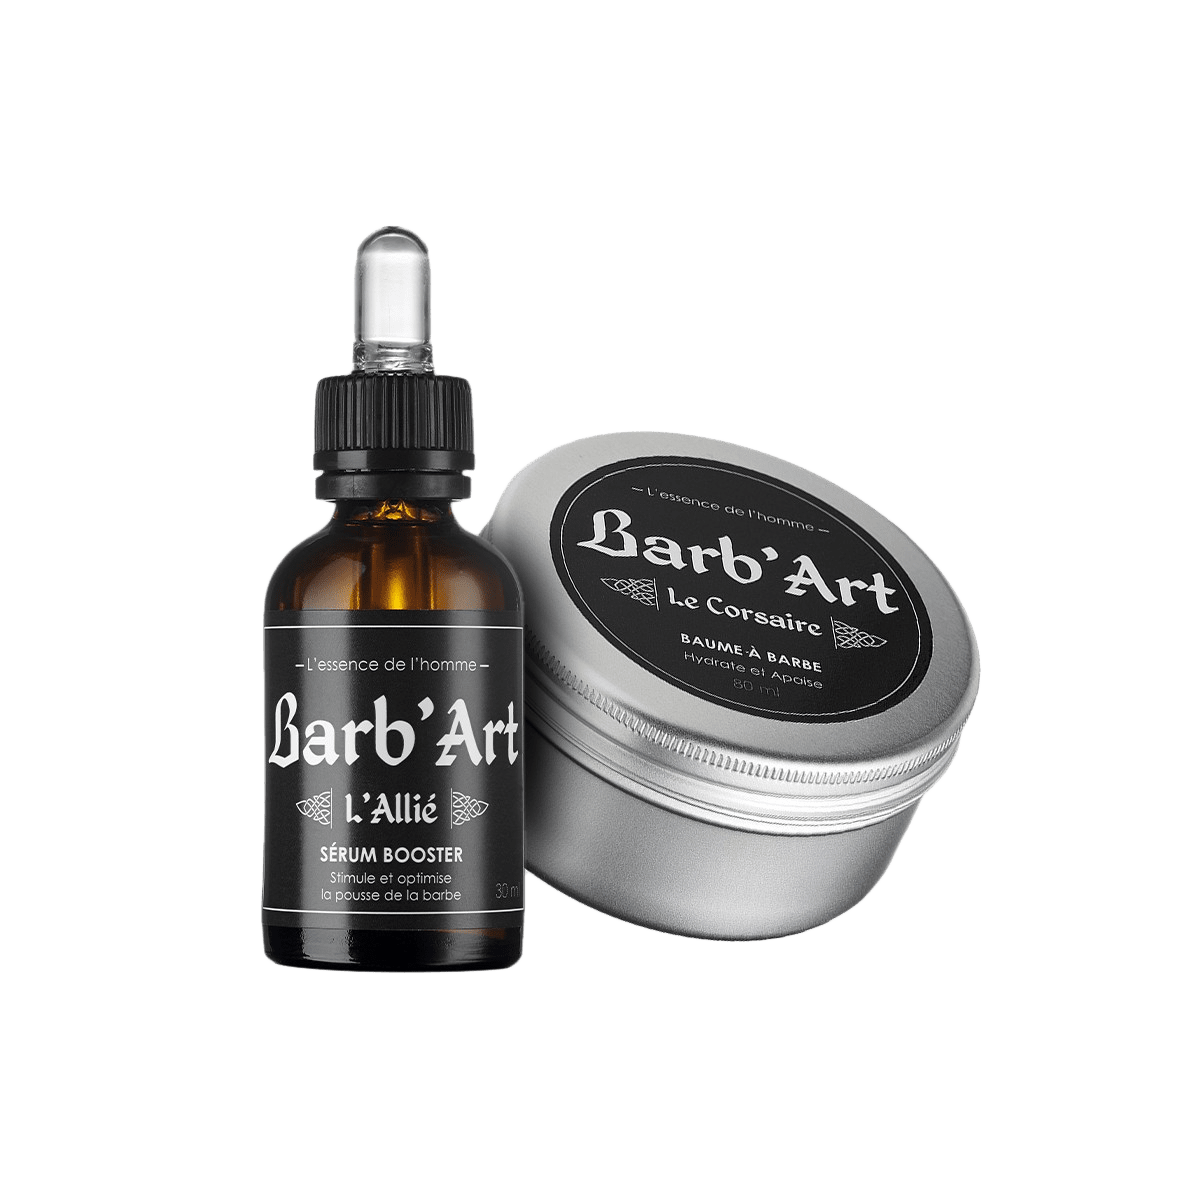 Kit barbe - Sérum Booster Soin Fortifiant Barbe &amp; Baume à Barbe - barbartfr